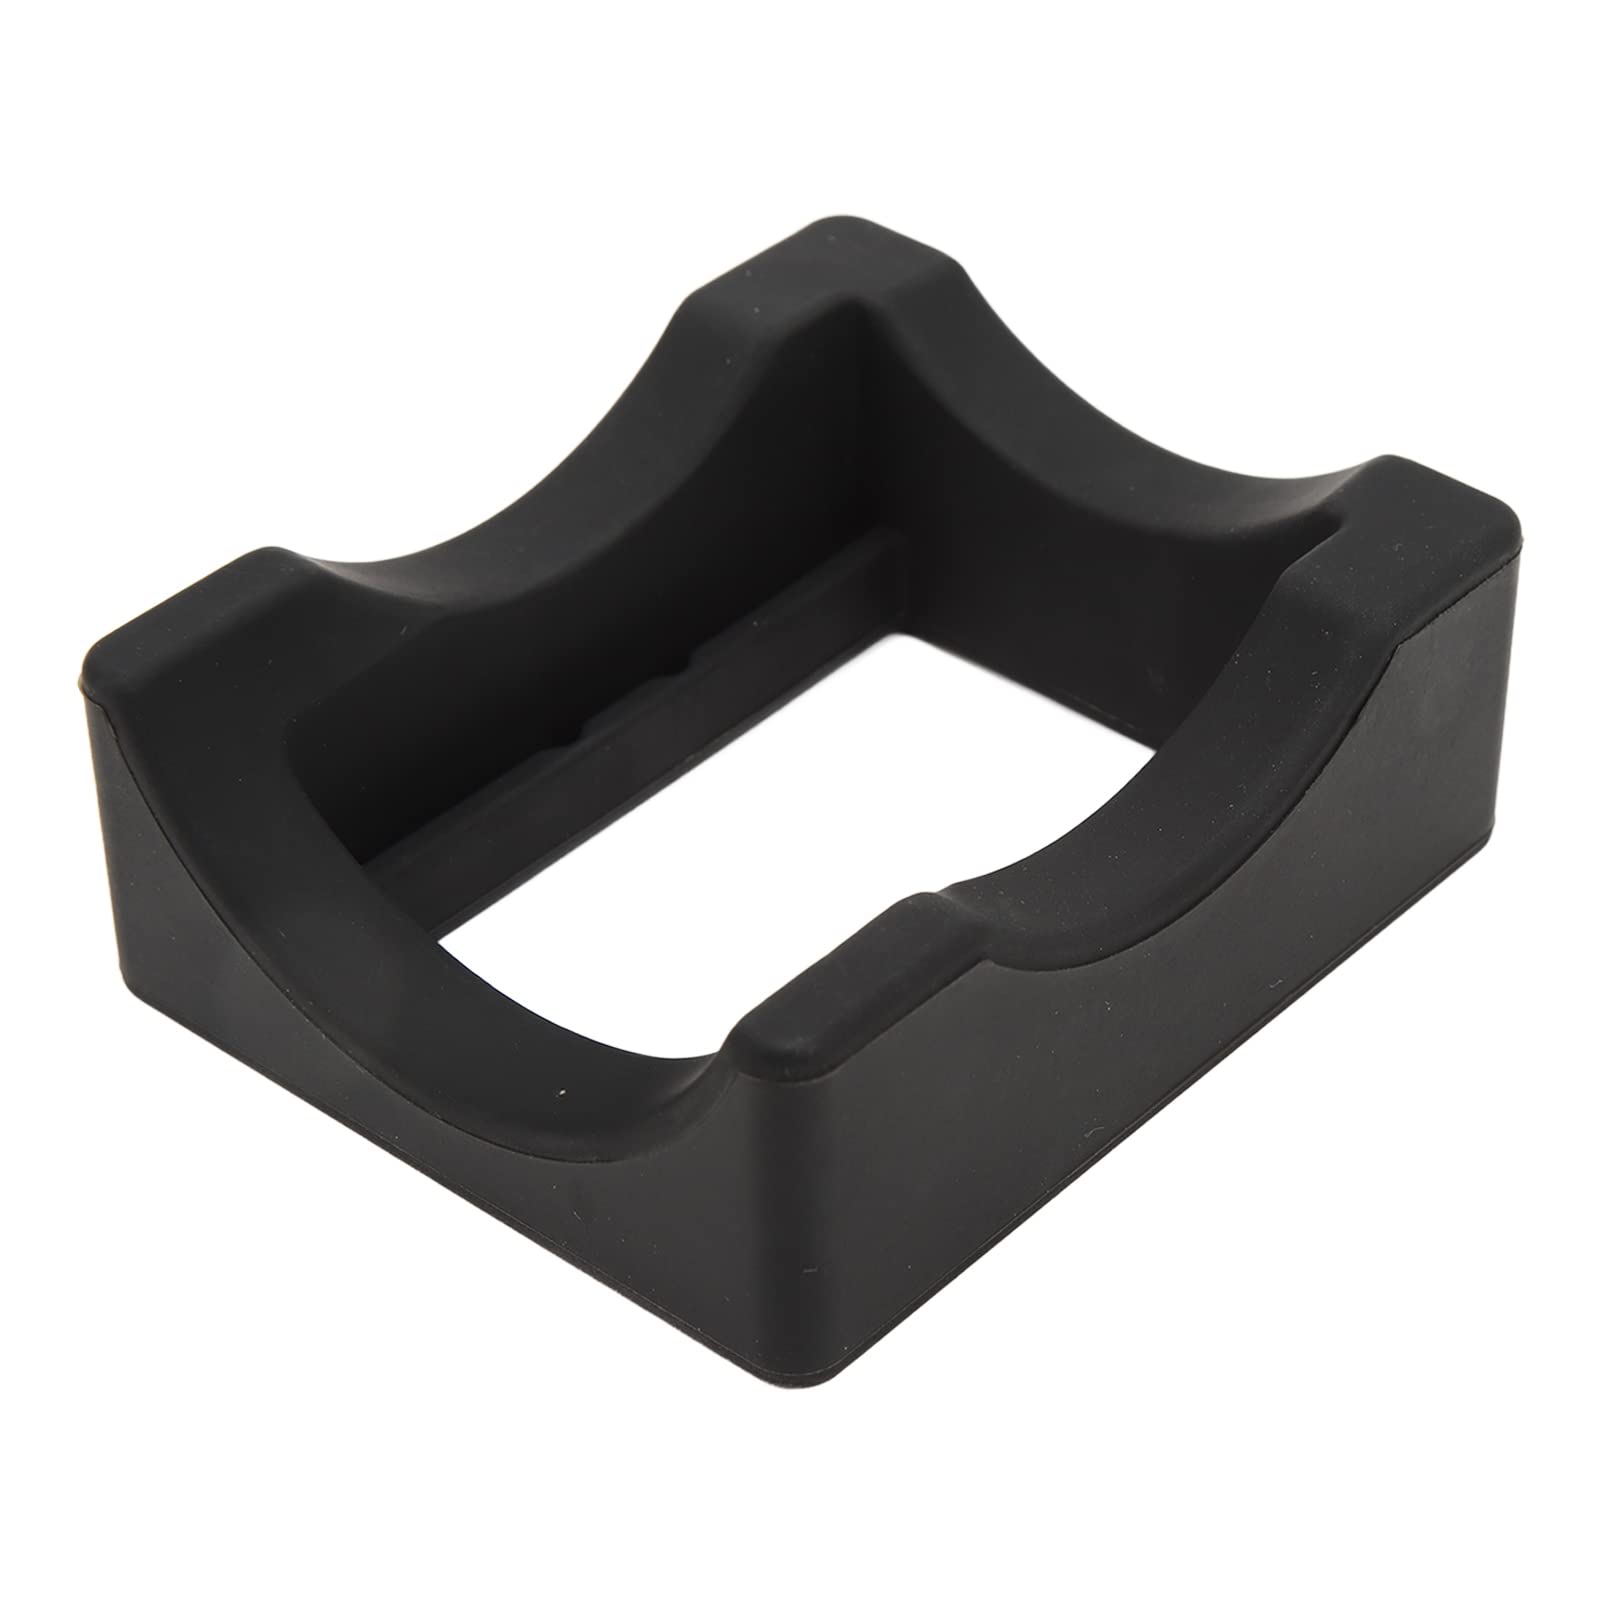 Non Slip Cup Cradle, Compact Silicone Cup Cradle Cup Holder Stable Support Anti Scratch Anti Scald for Decoration(Black)